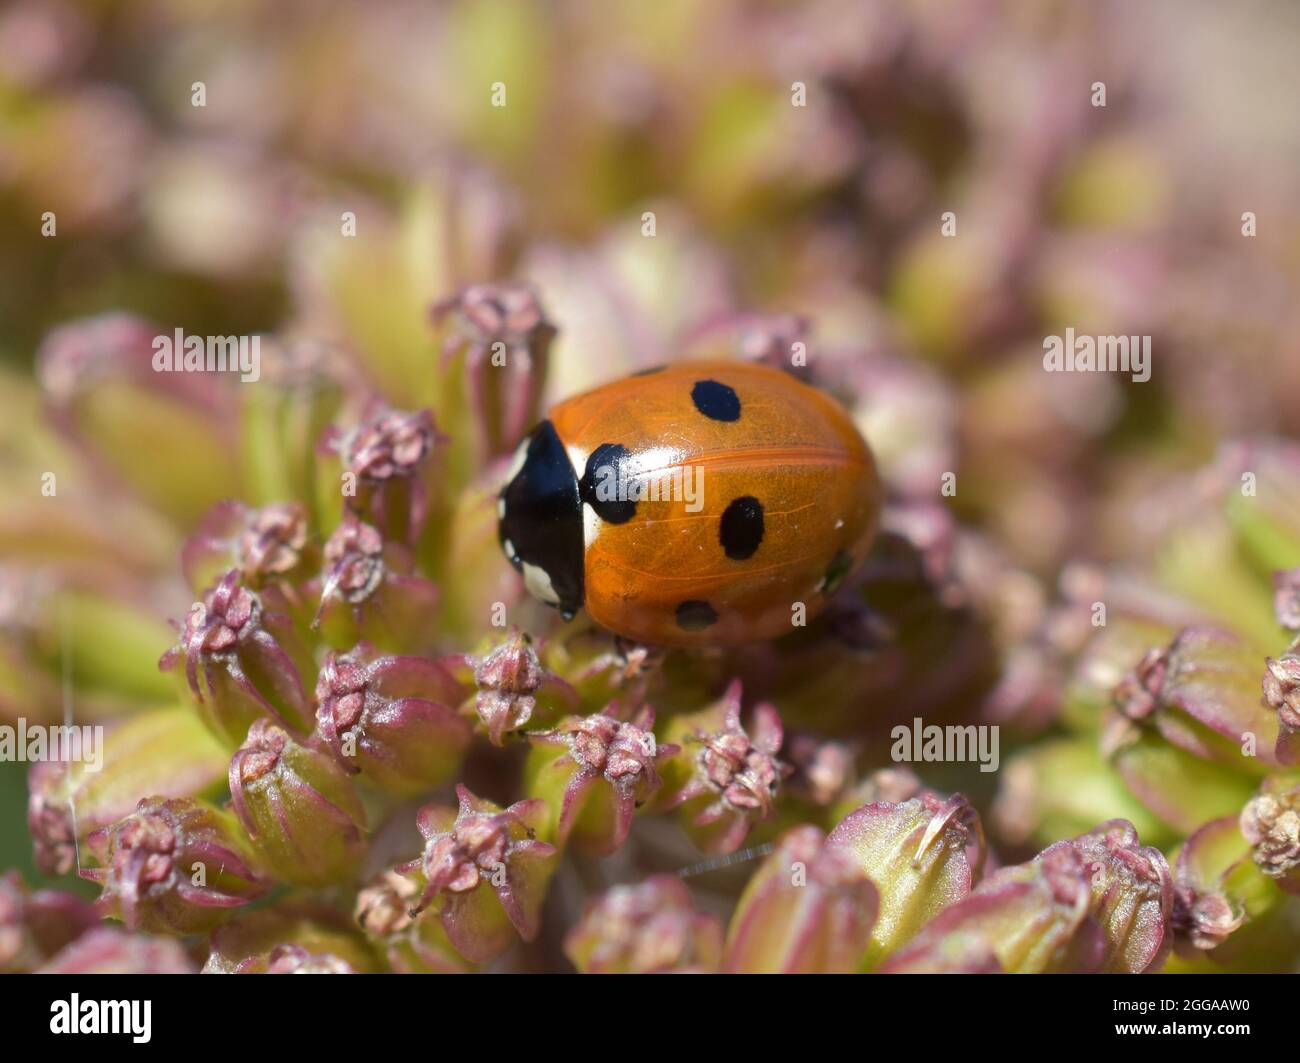 Sevenspotted ladybird coccinella septempunctata on a pink plant Stock Photo